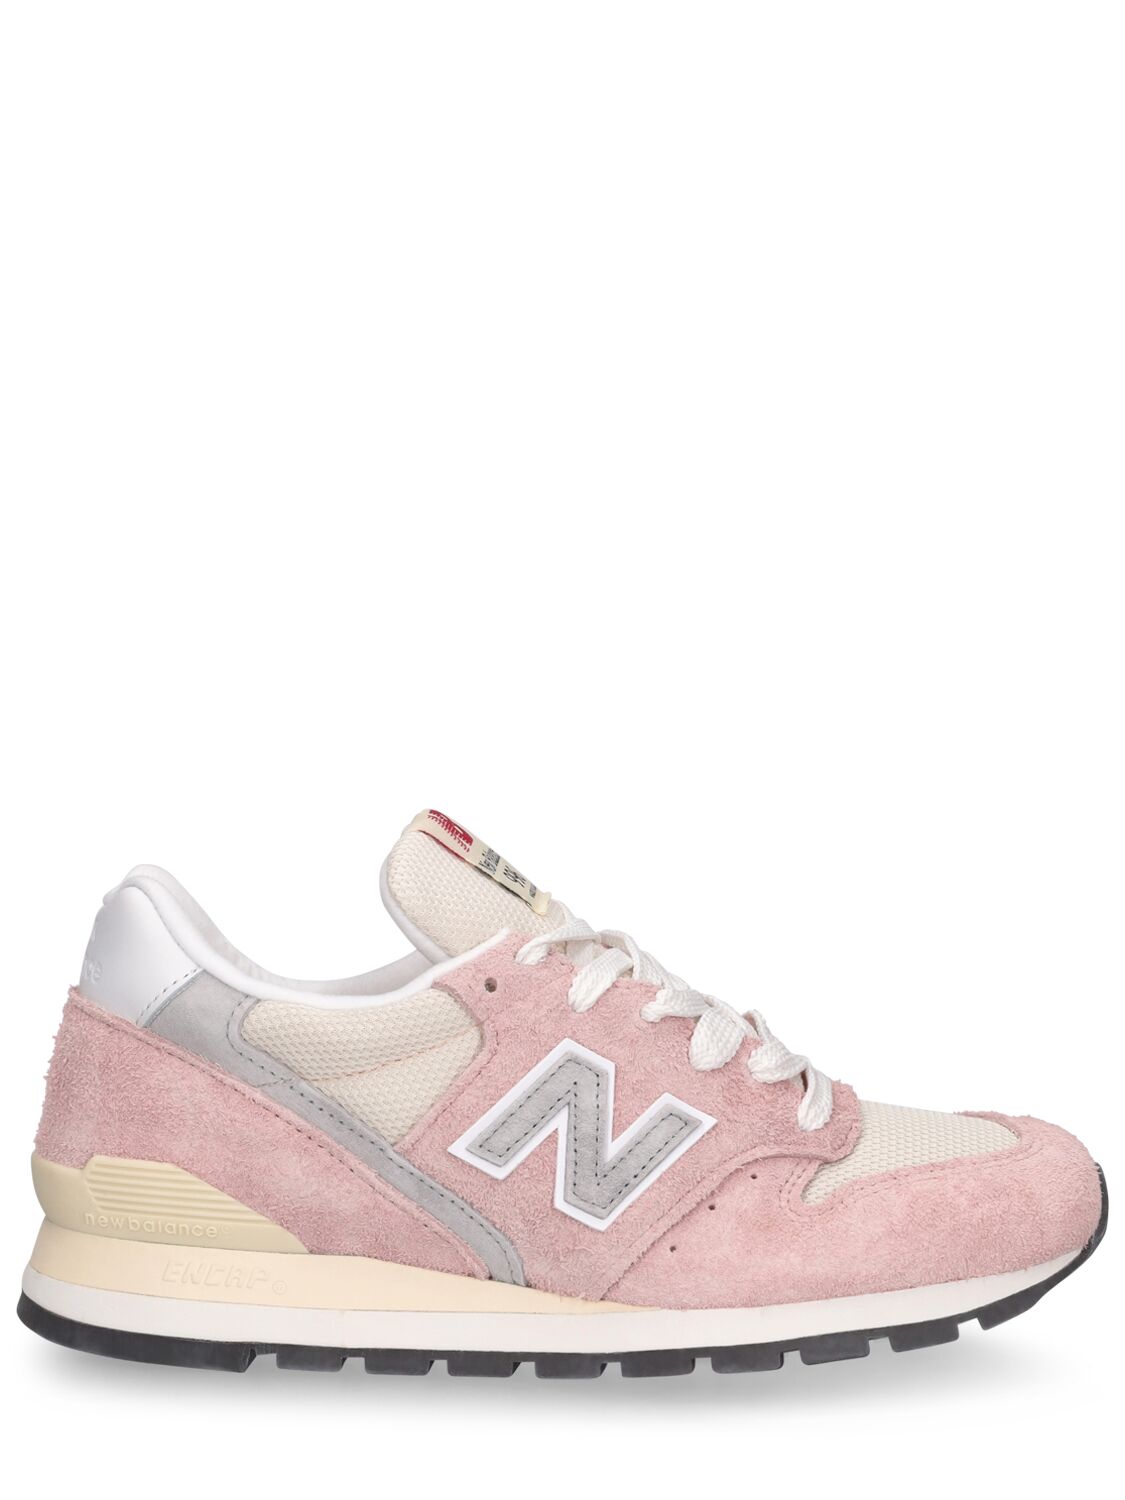 NEW BALANCE 996 SNEAKERS